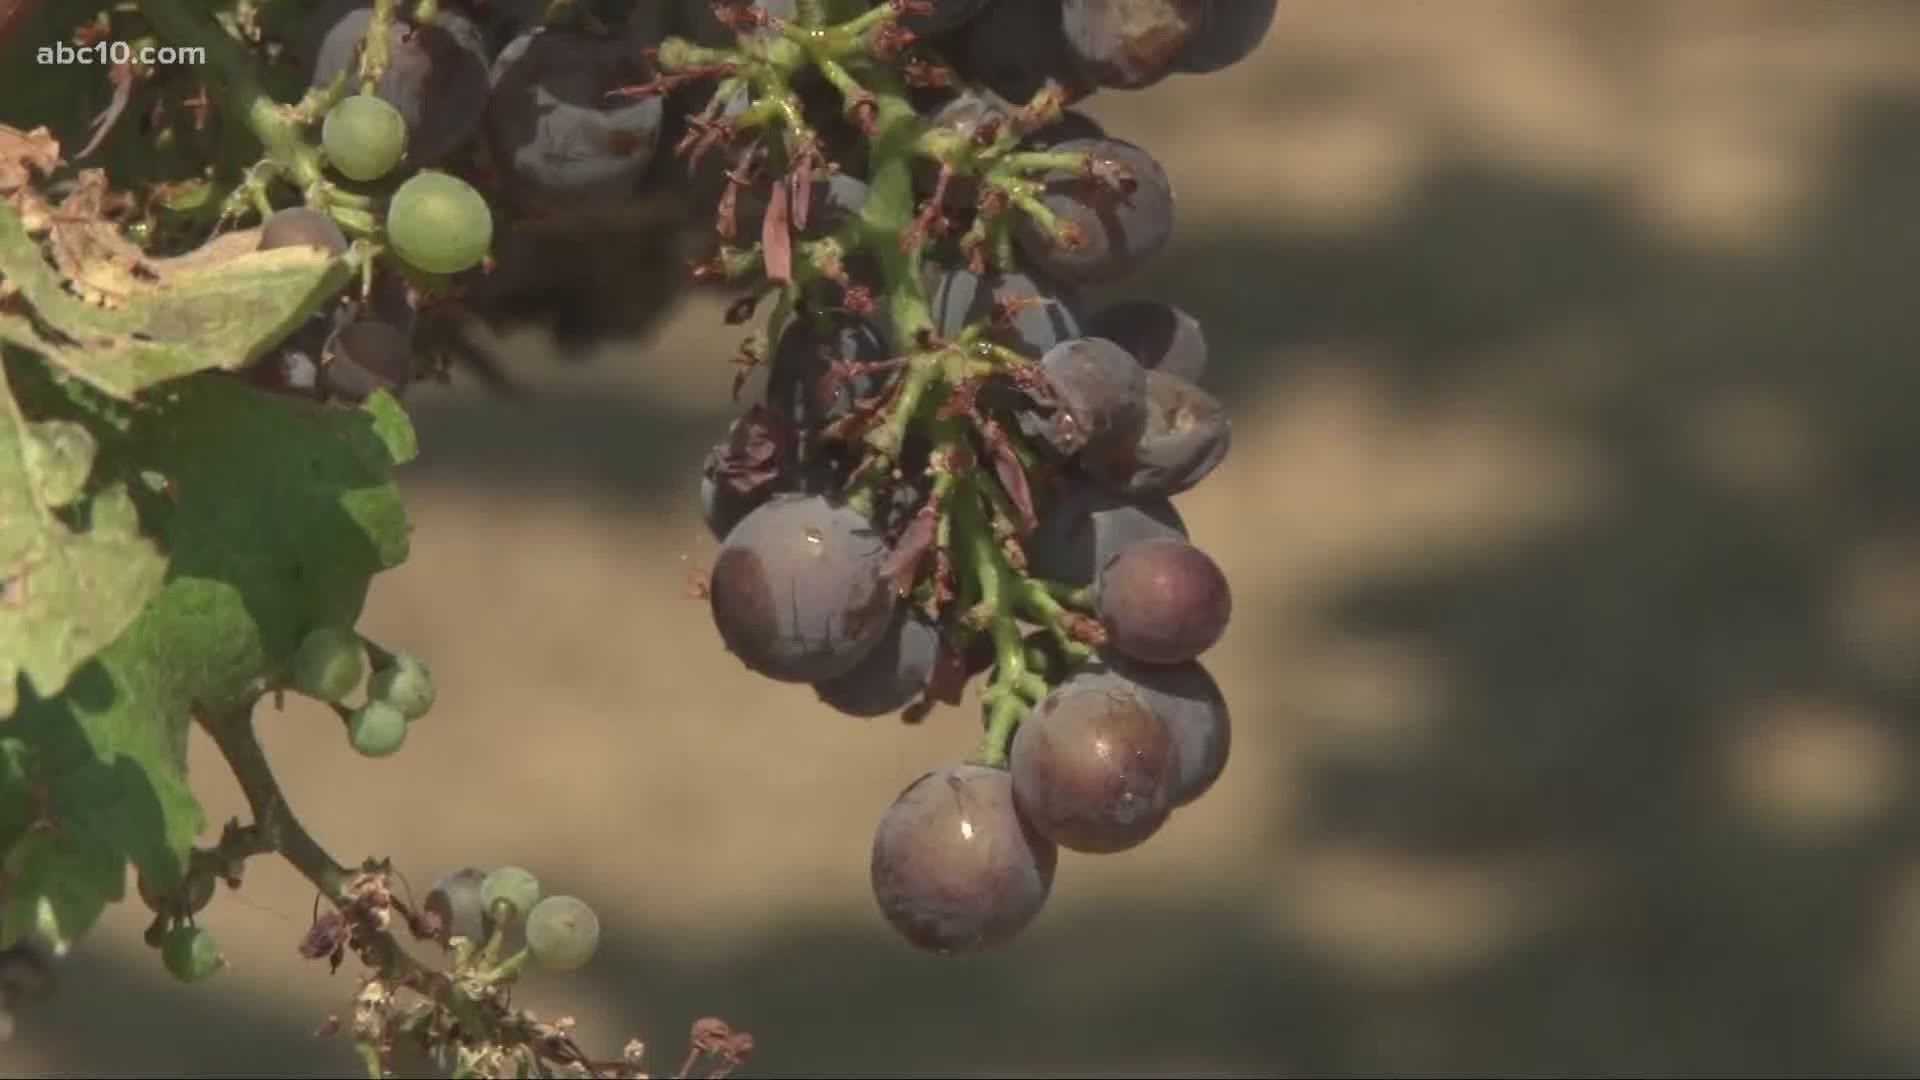 Even with bad air quality and wildfires in Northern California, the agricultural harvest must continue. Here's how the wildfires are impacting this year's harvest.